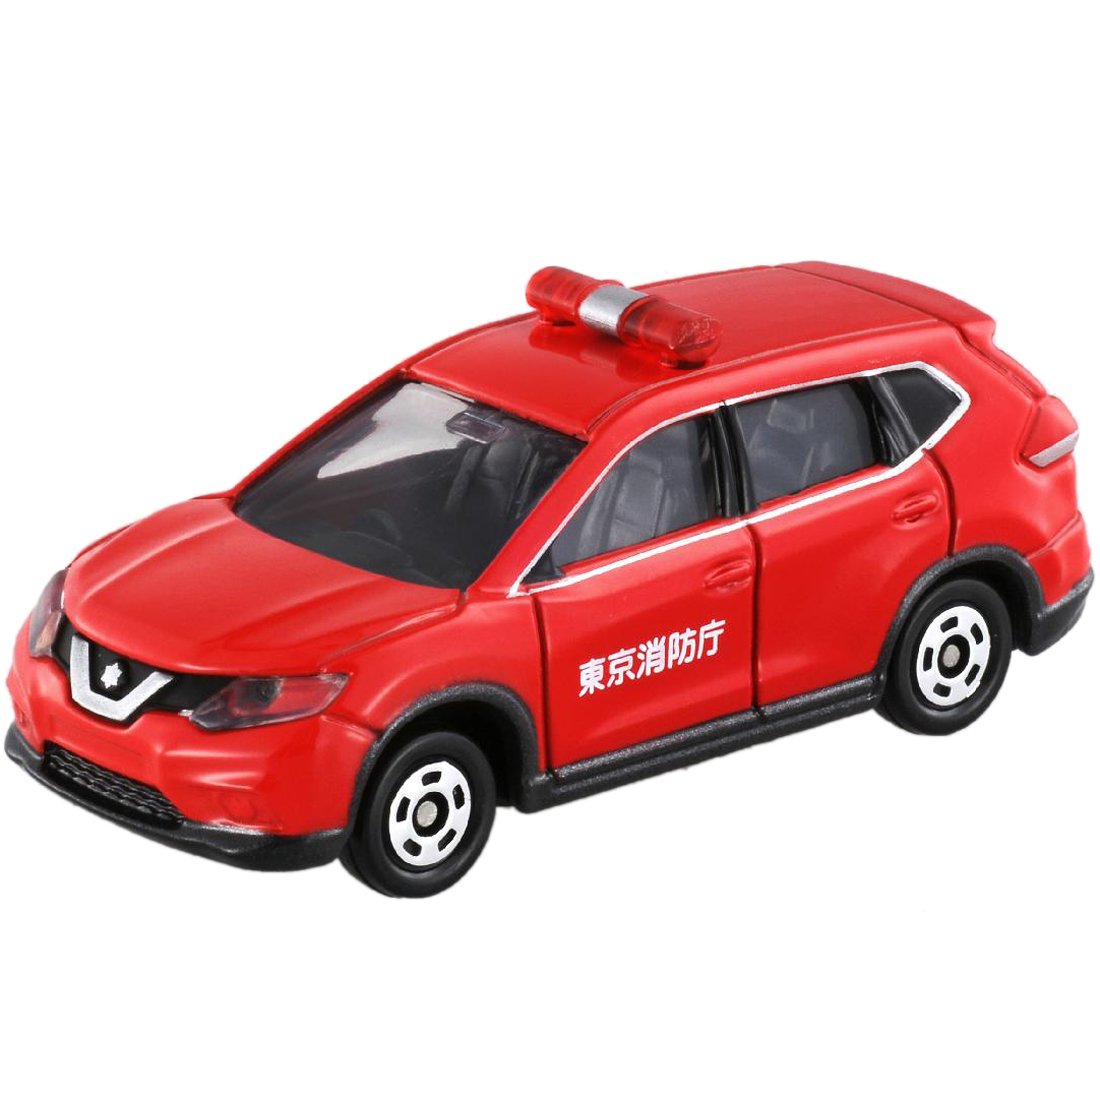 TAKARA TOMY Tomica 1 Nissan X-Trail Firefighters Conduct Car 879398